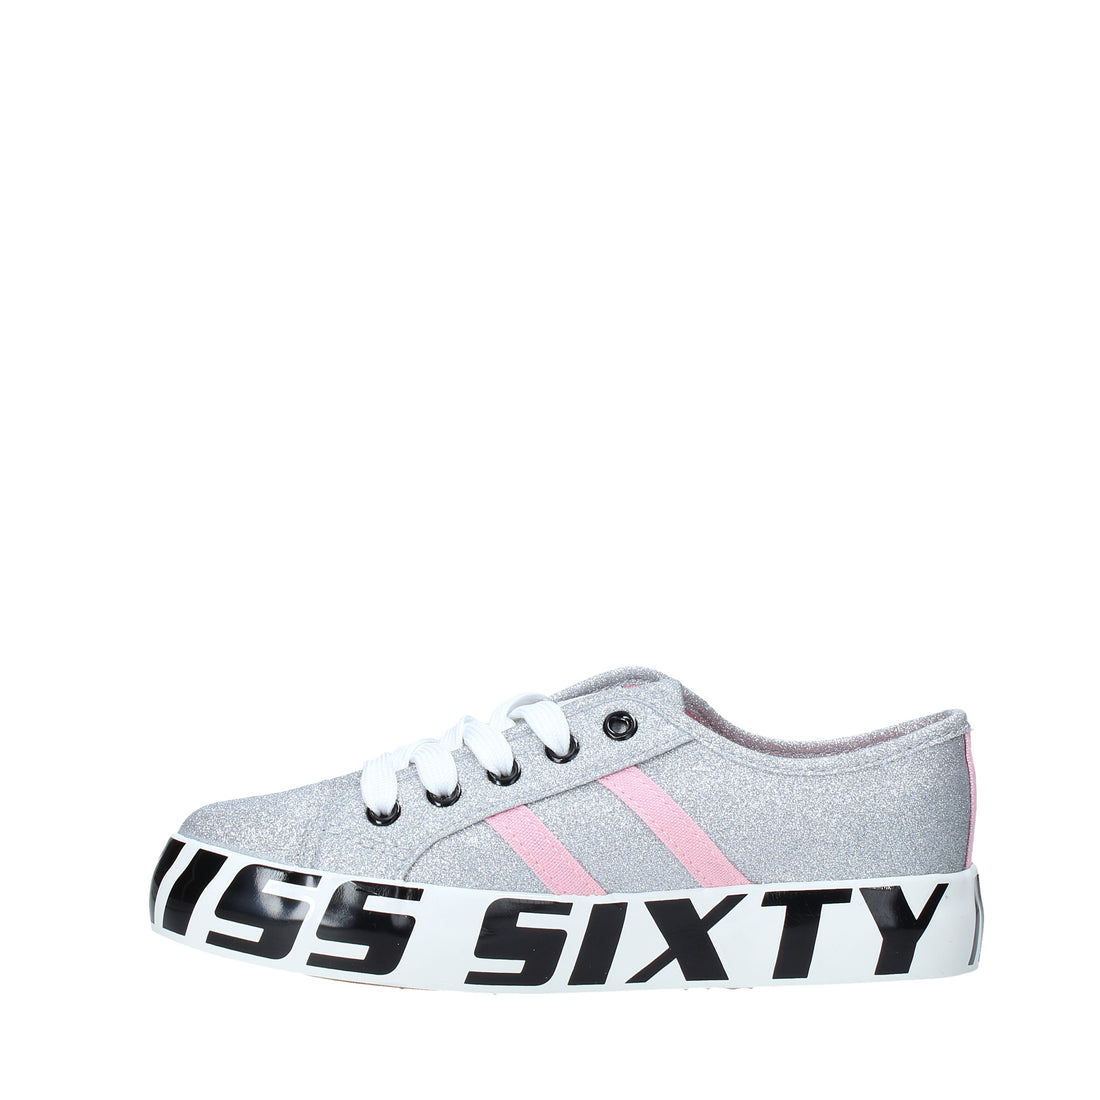 Sneakers Argentato Miss Sixty